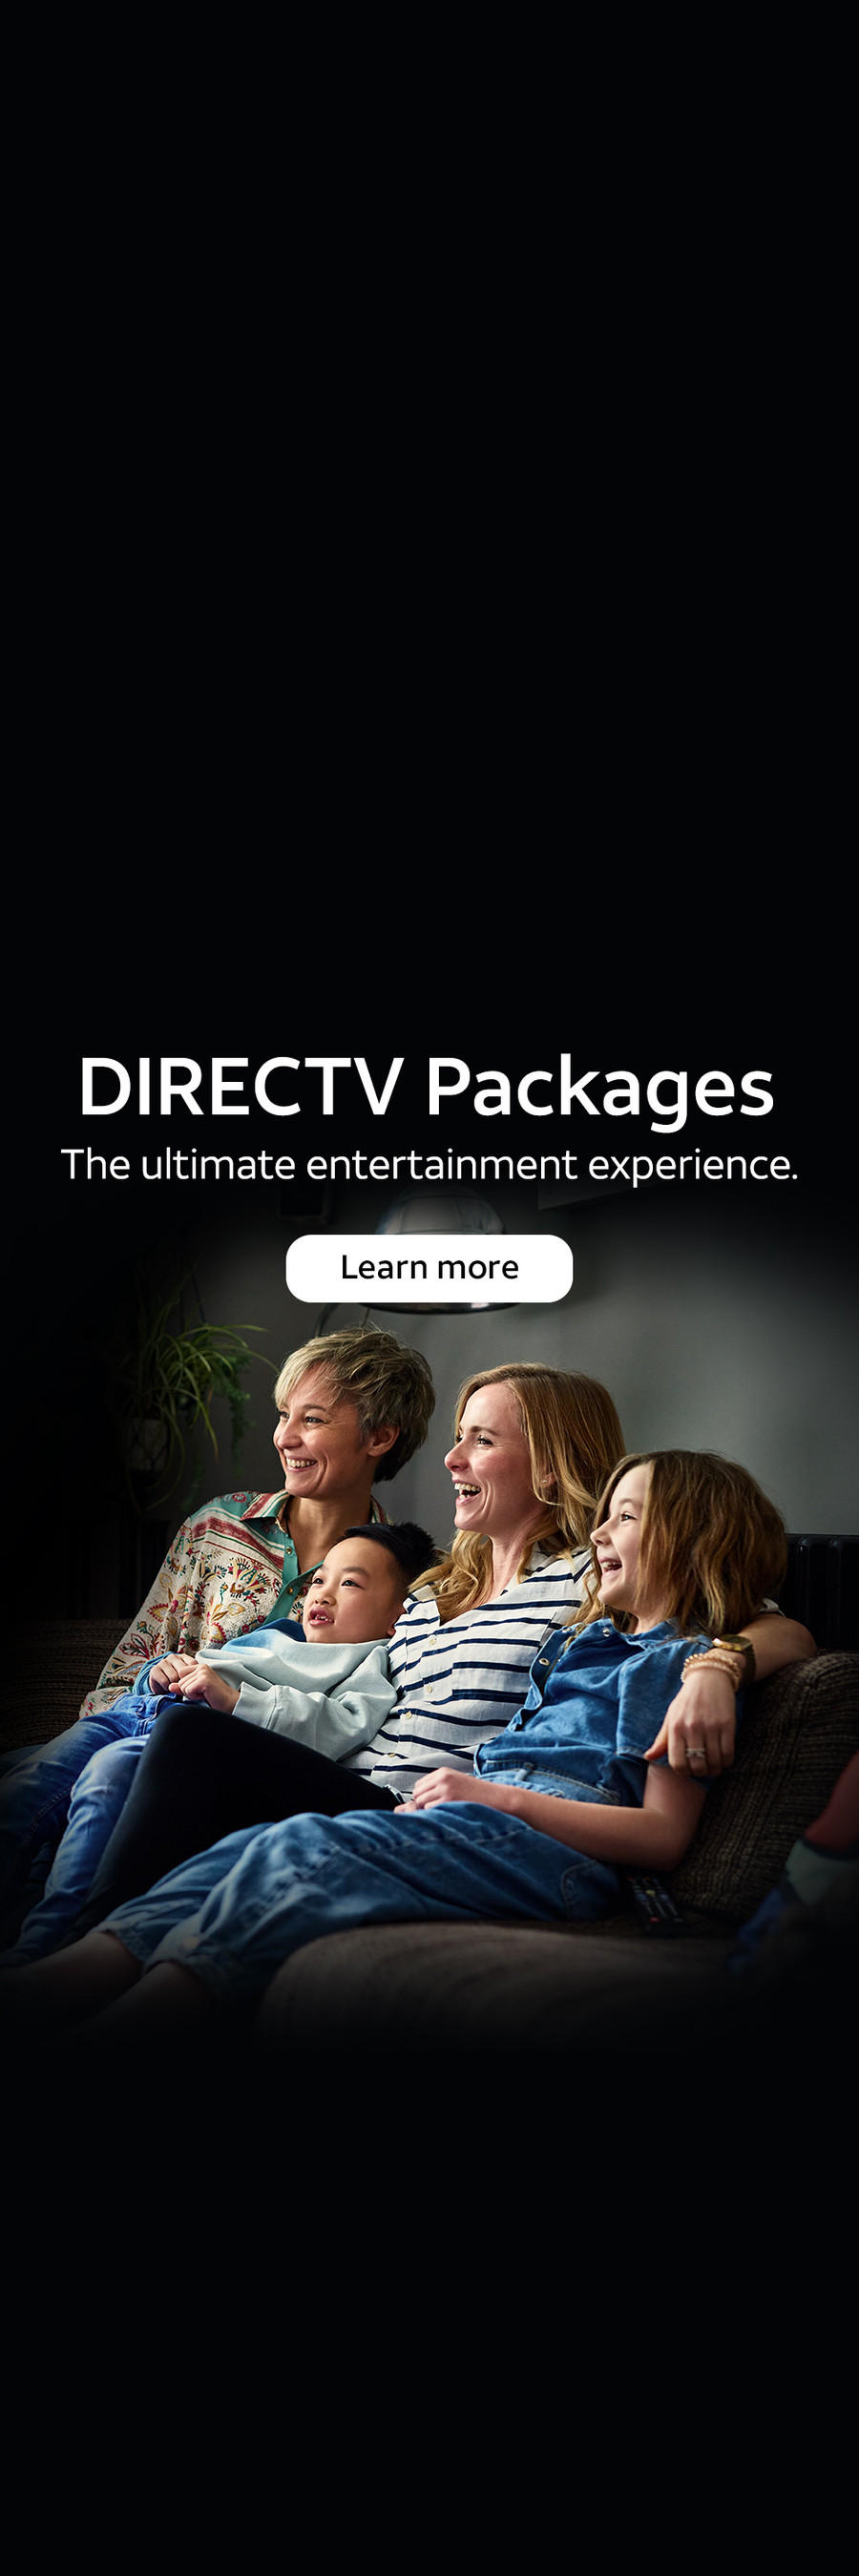 Parallax Ad: MOVIES_PR4_DIRECTV_PACKAGES_1000x3000_20300731_BJ